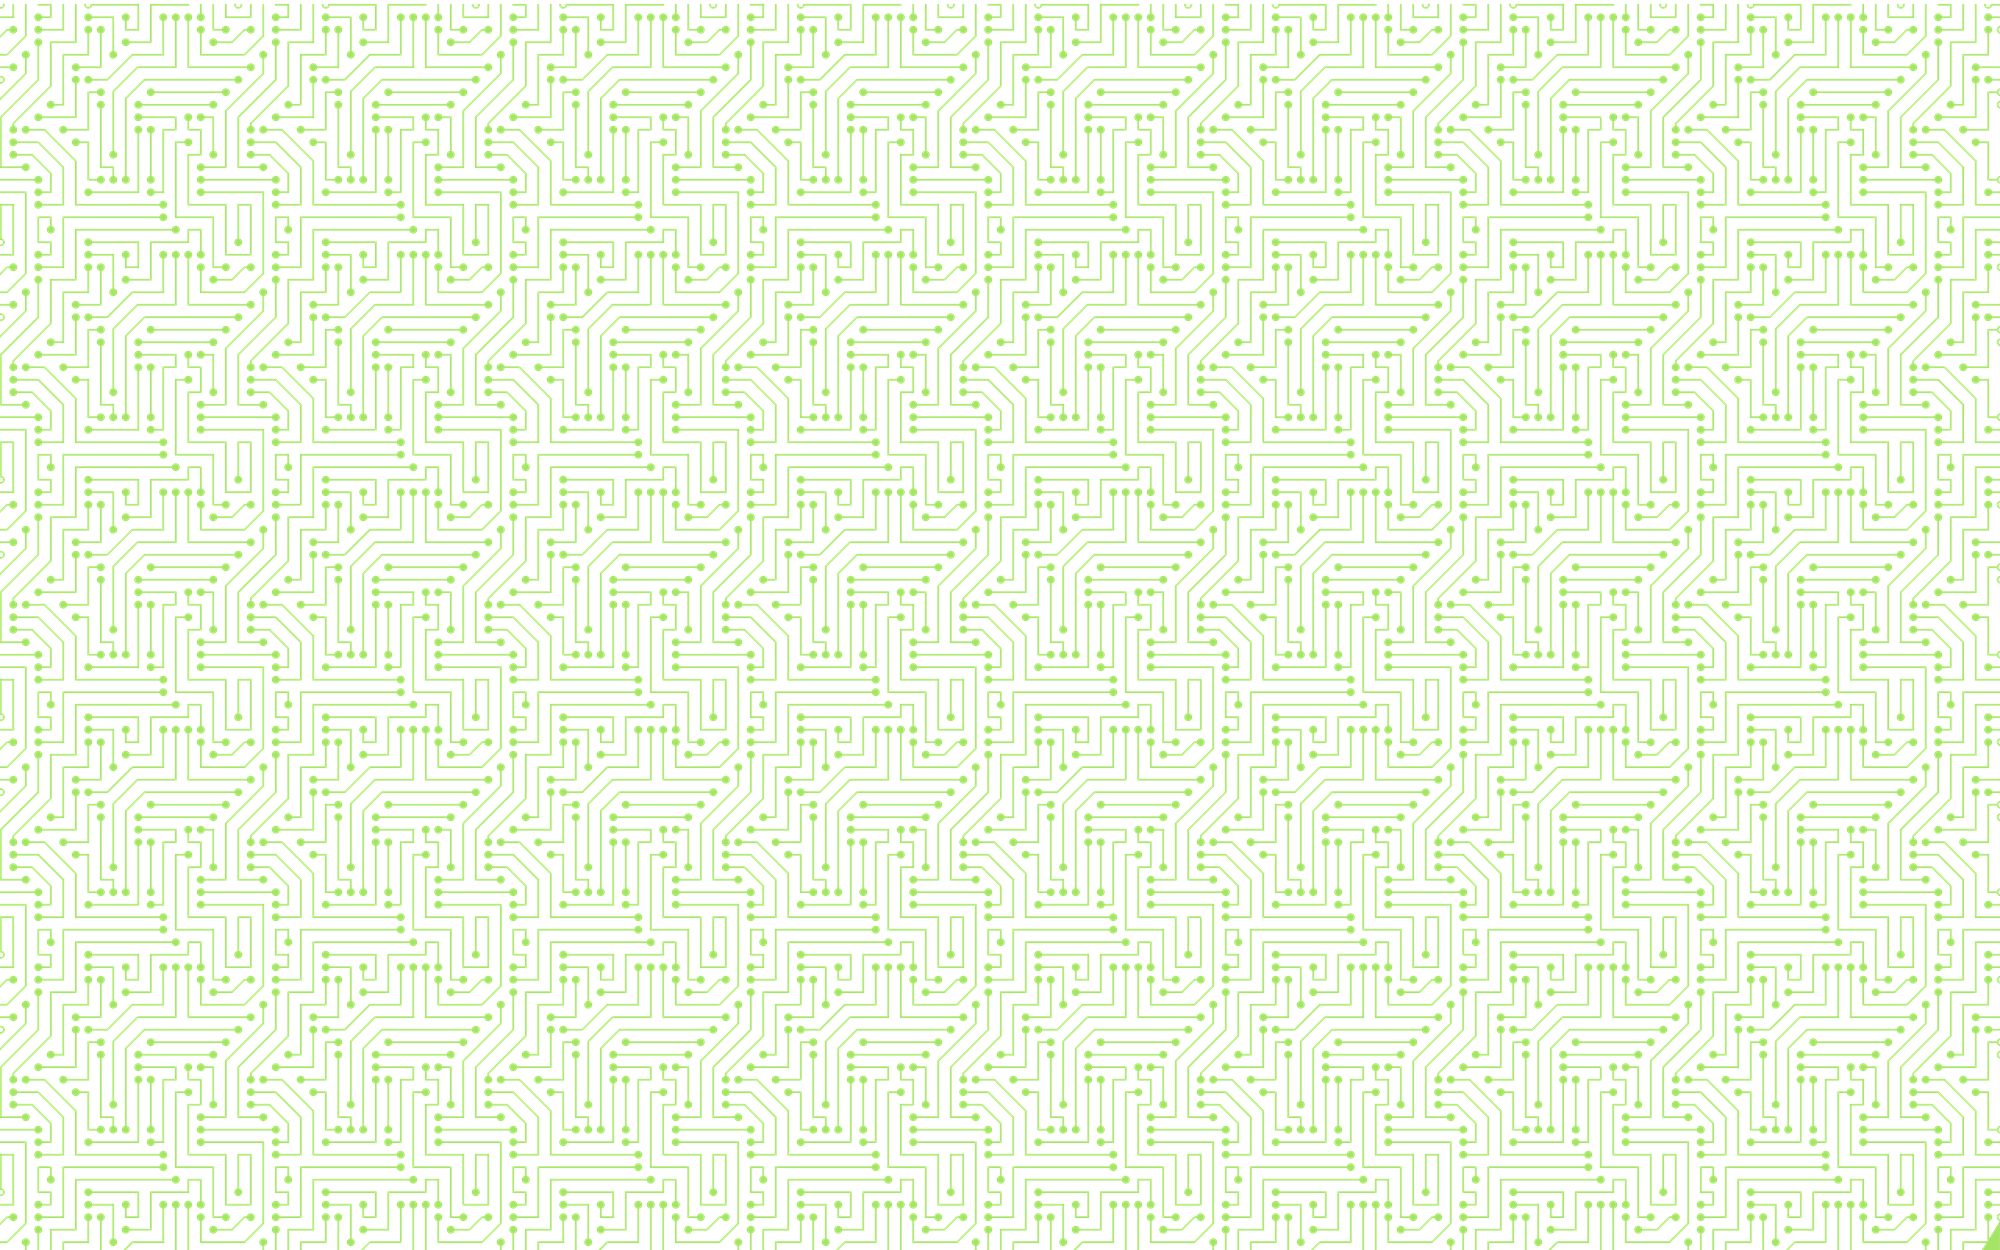 Backgrounds - Computer Circuits - Bright Green